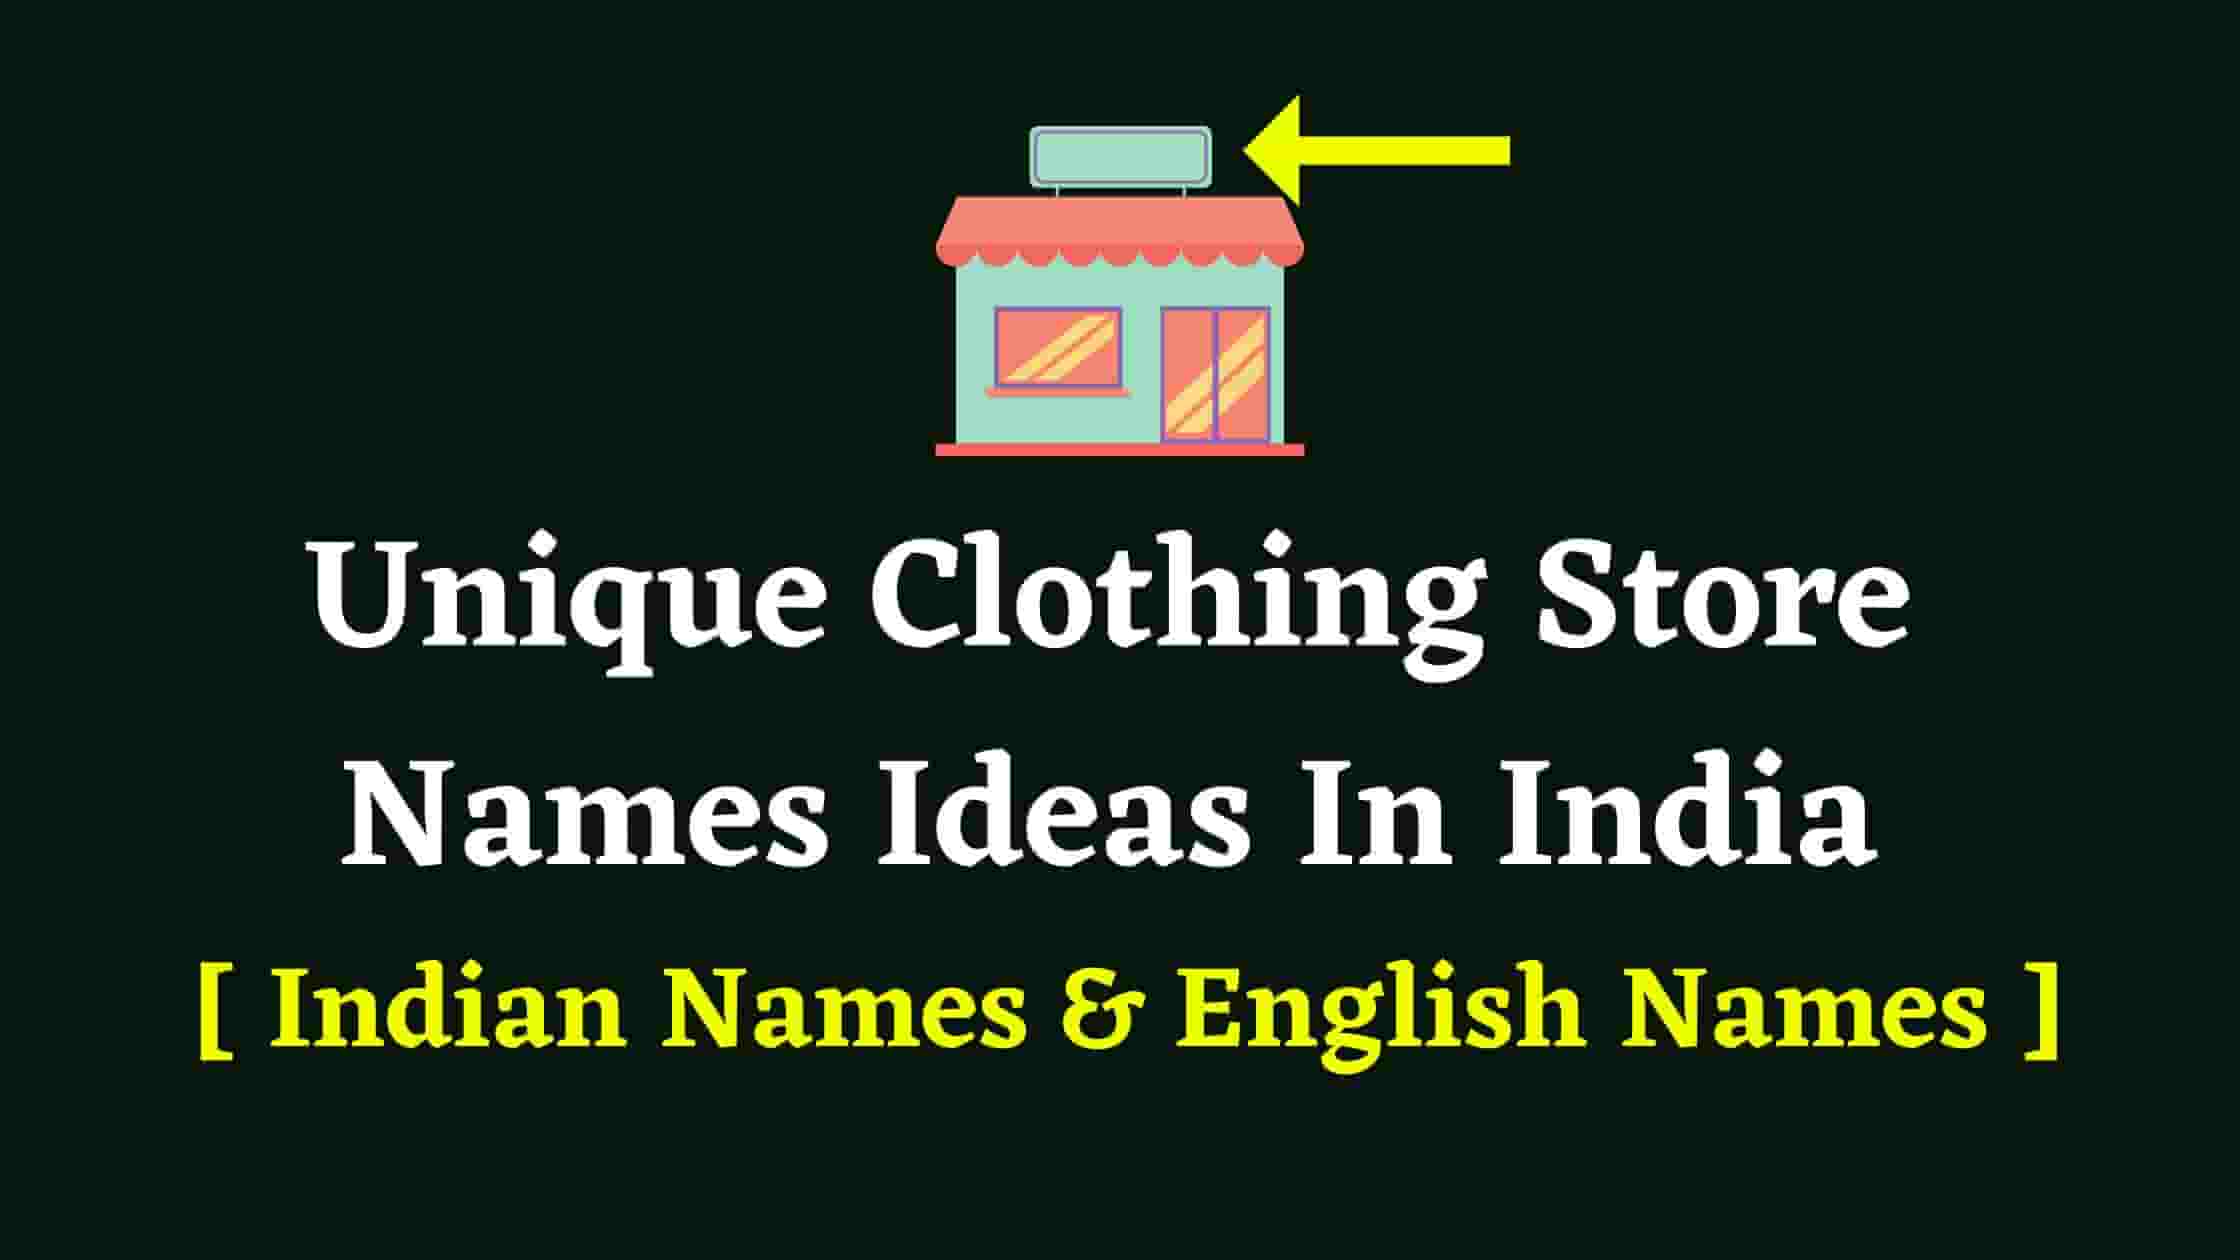 184 Garments Shop Names Ideas In India | 184 Clothing Store Names Ideas In  India - Big Mastery